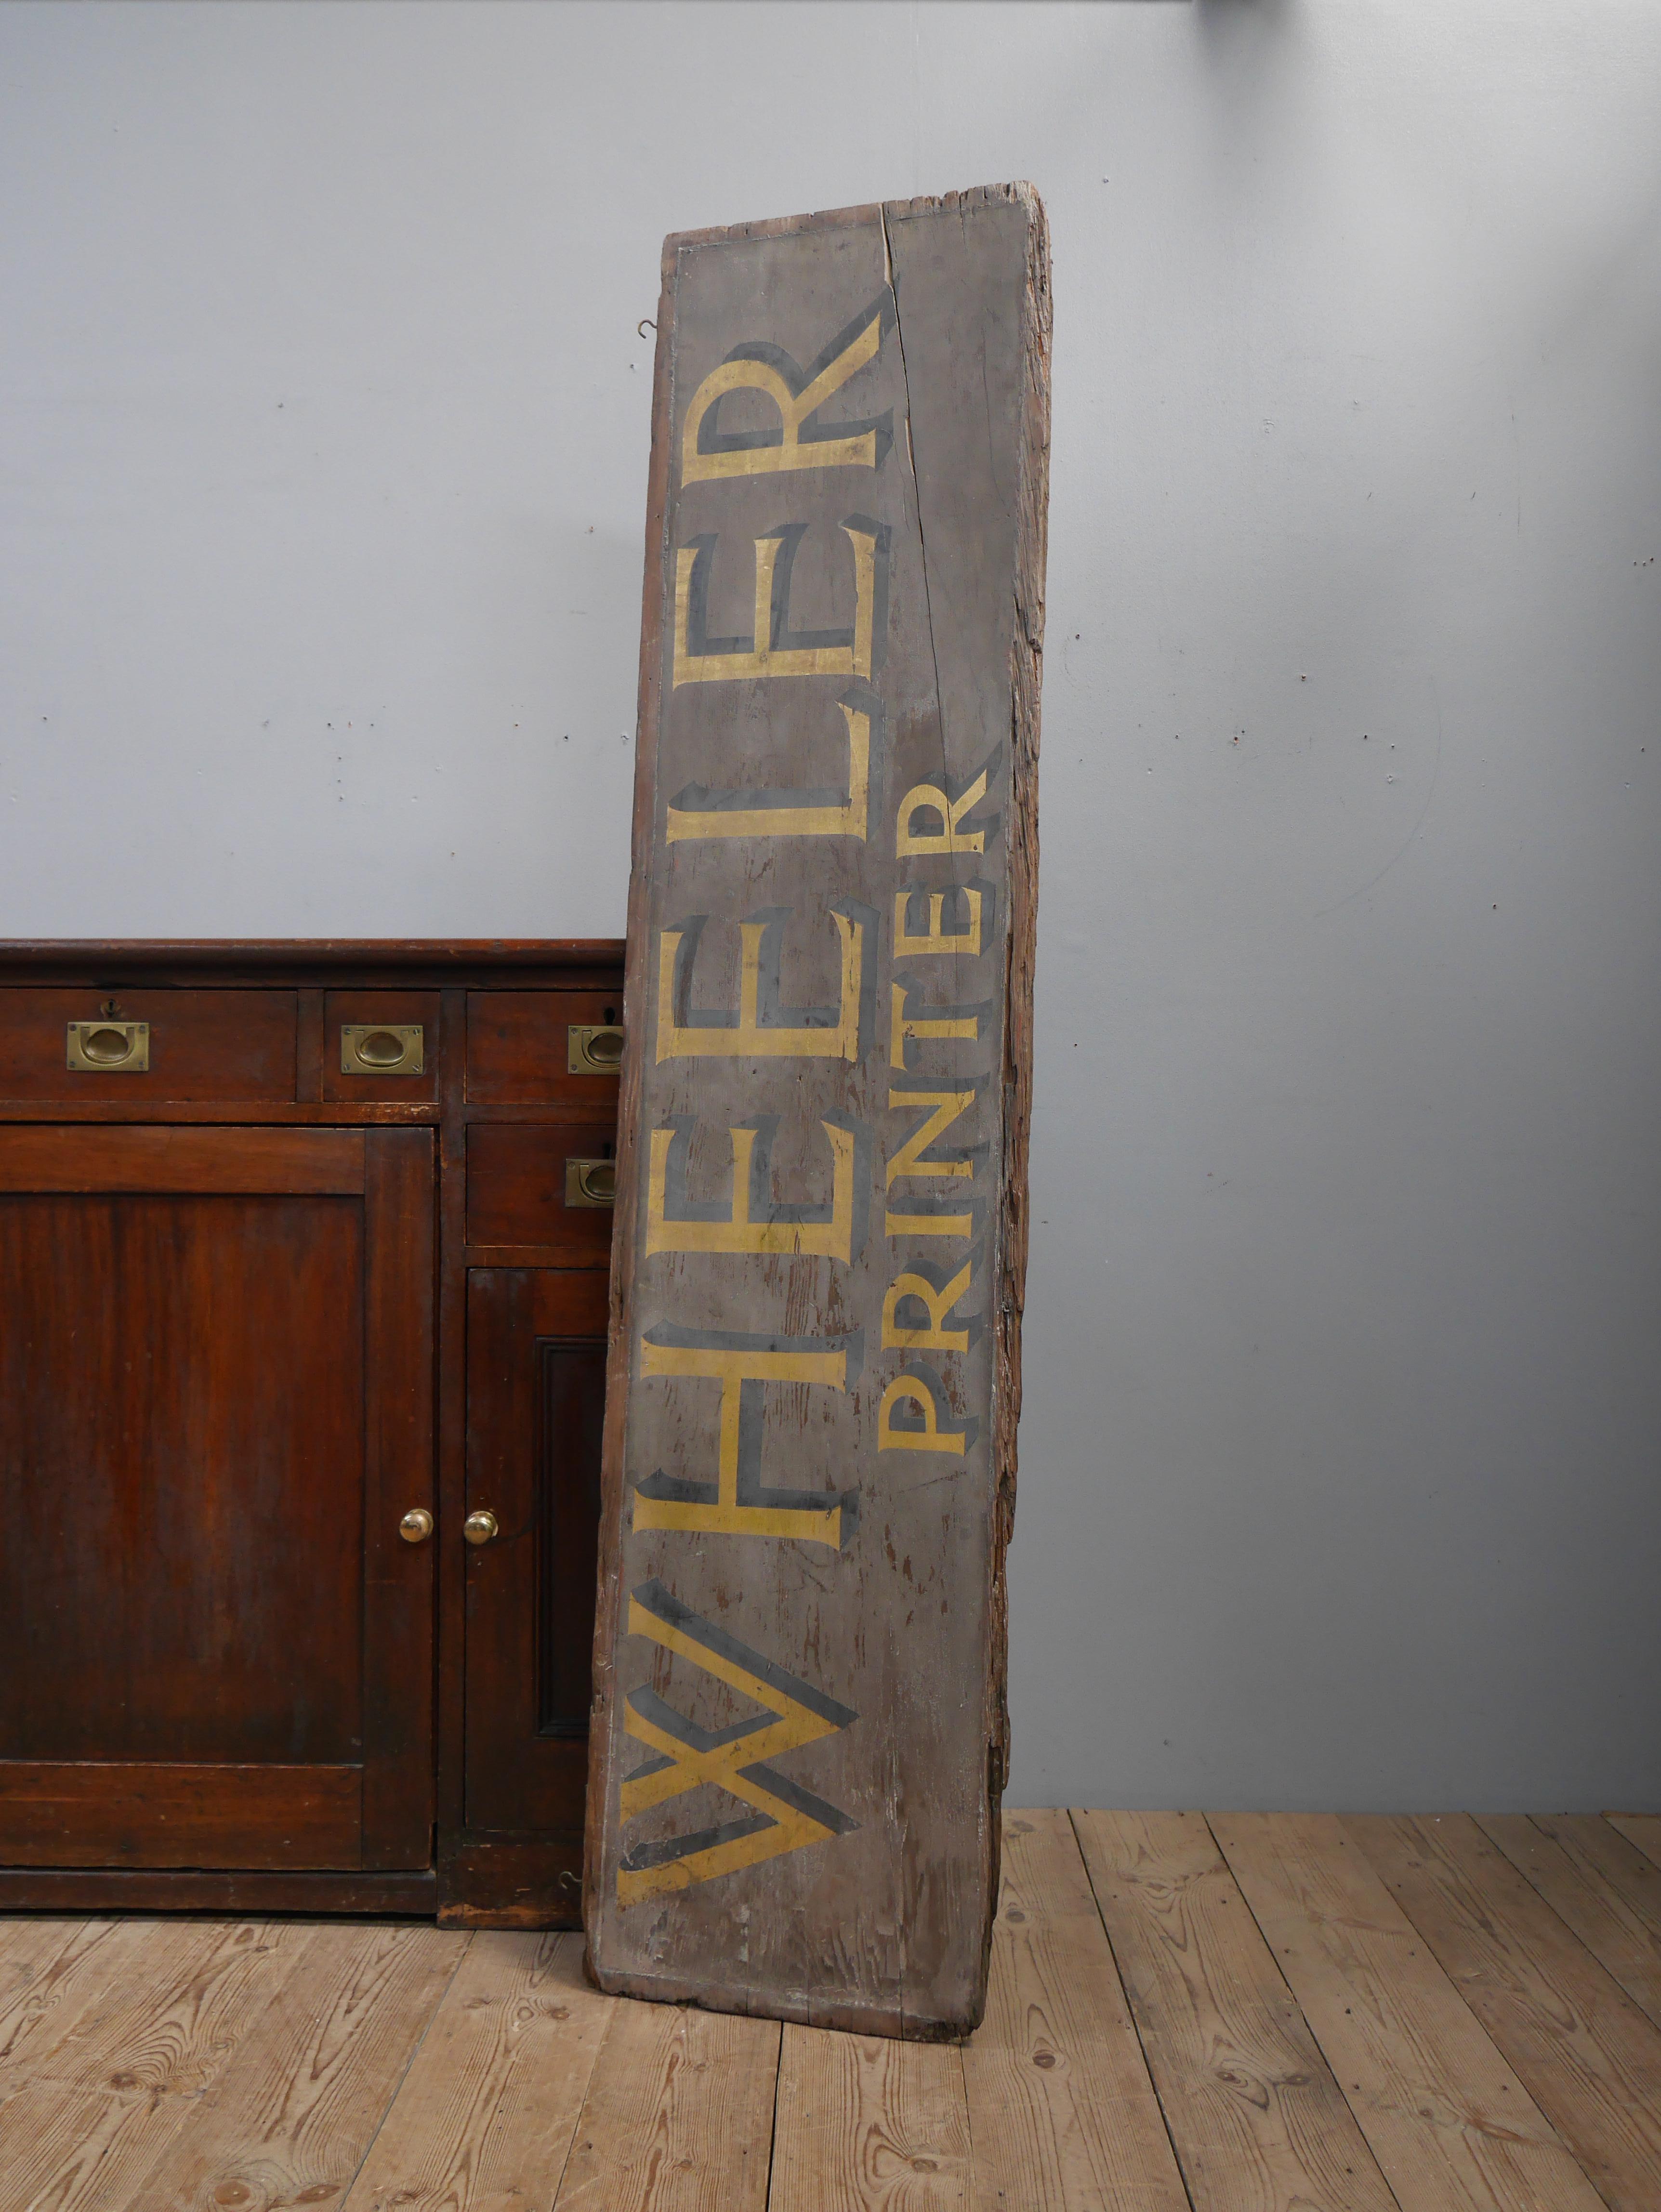 An early printer's trade sign.
A wonderful 19th century painted timber trade sign for 'Wheeler' printer's, delightfully original & untouched with the perfect patina. The sign is double sided with the bold gilt lettering with a black shadow expertly